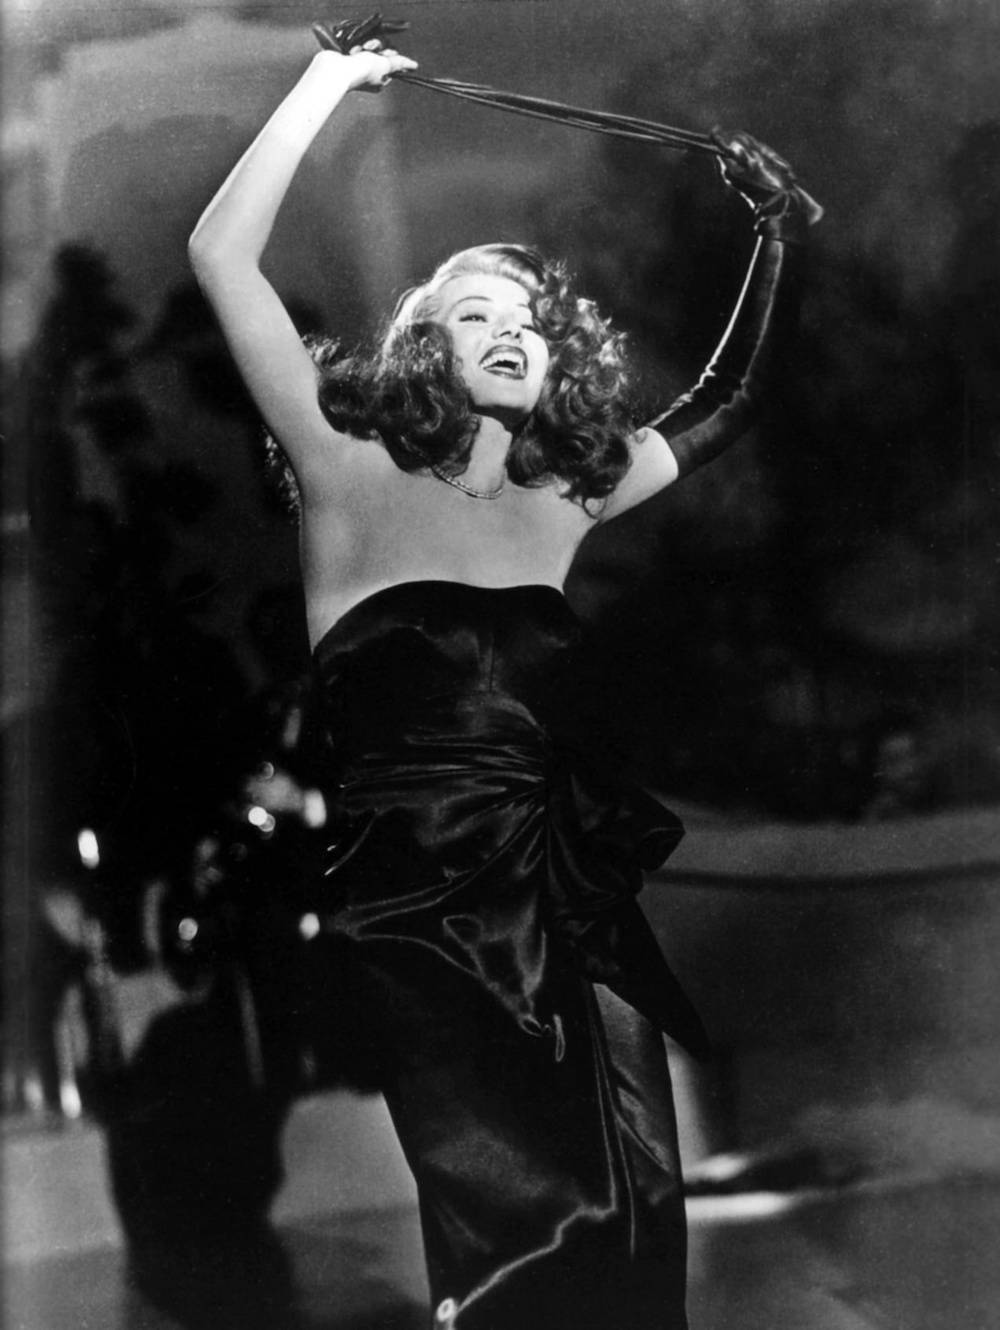 Suknia z operowymi rękawiczkami Rity Hayworth z „Gildy” (Fot. Columbia Pictures Corporation/Collection Christophel/East News)